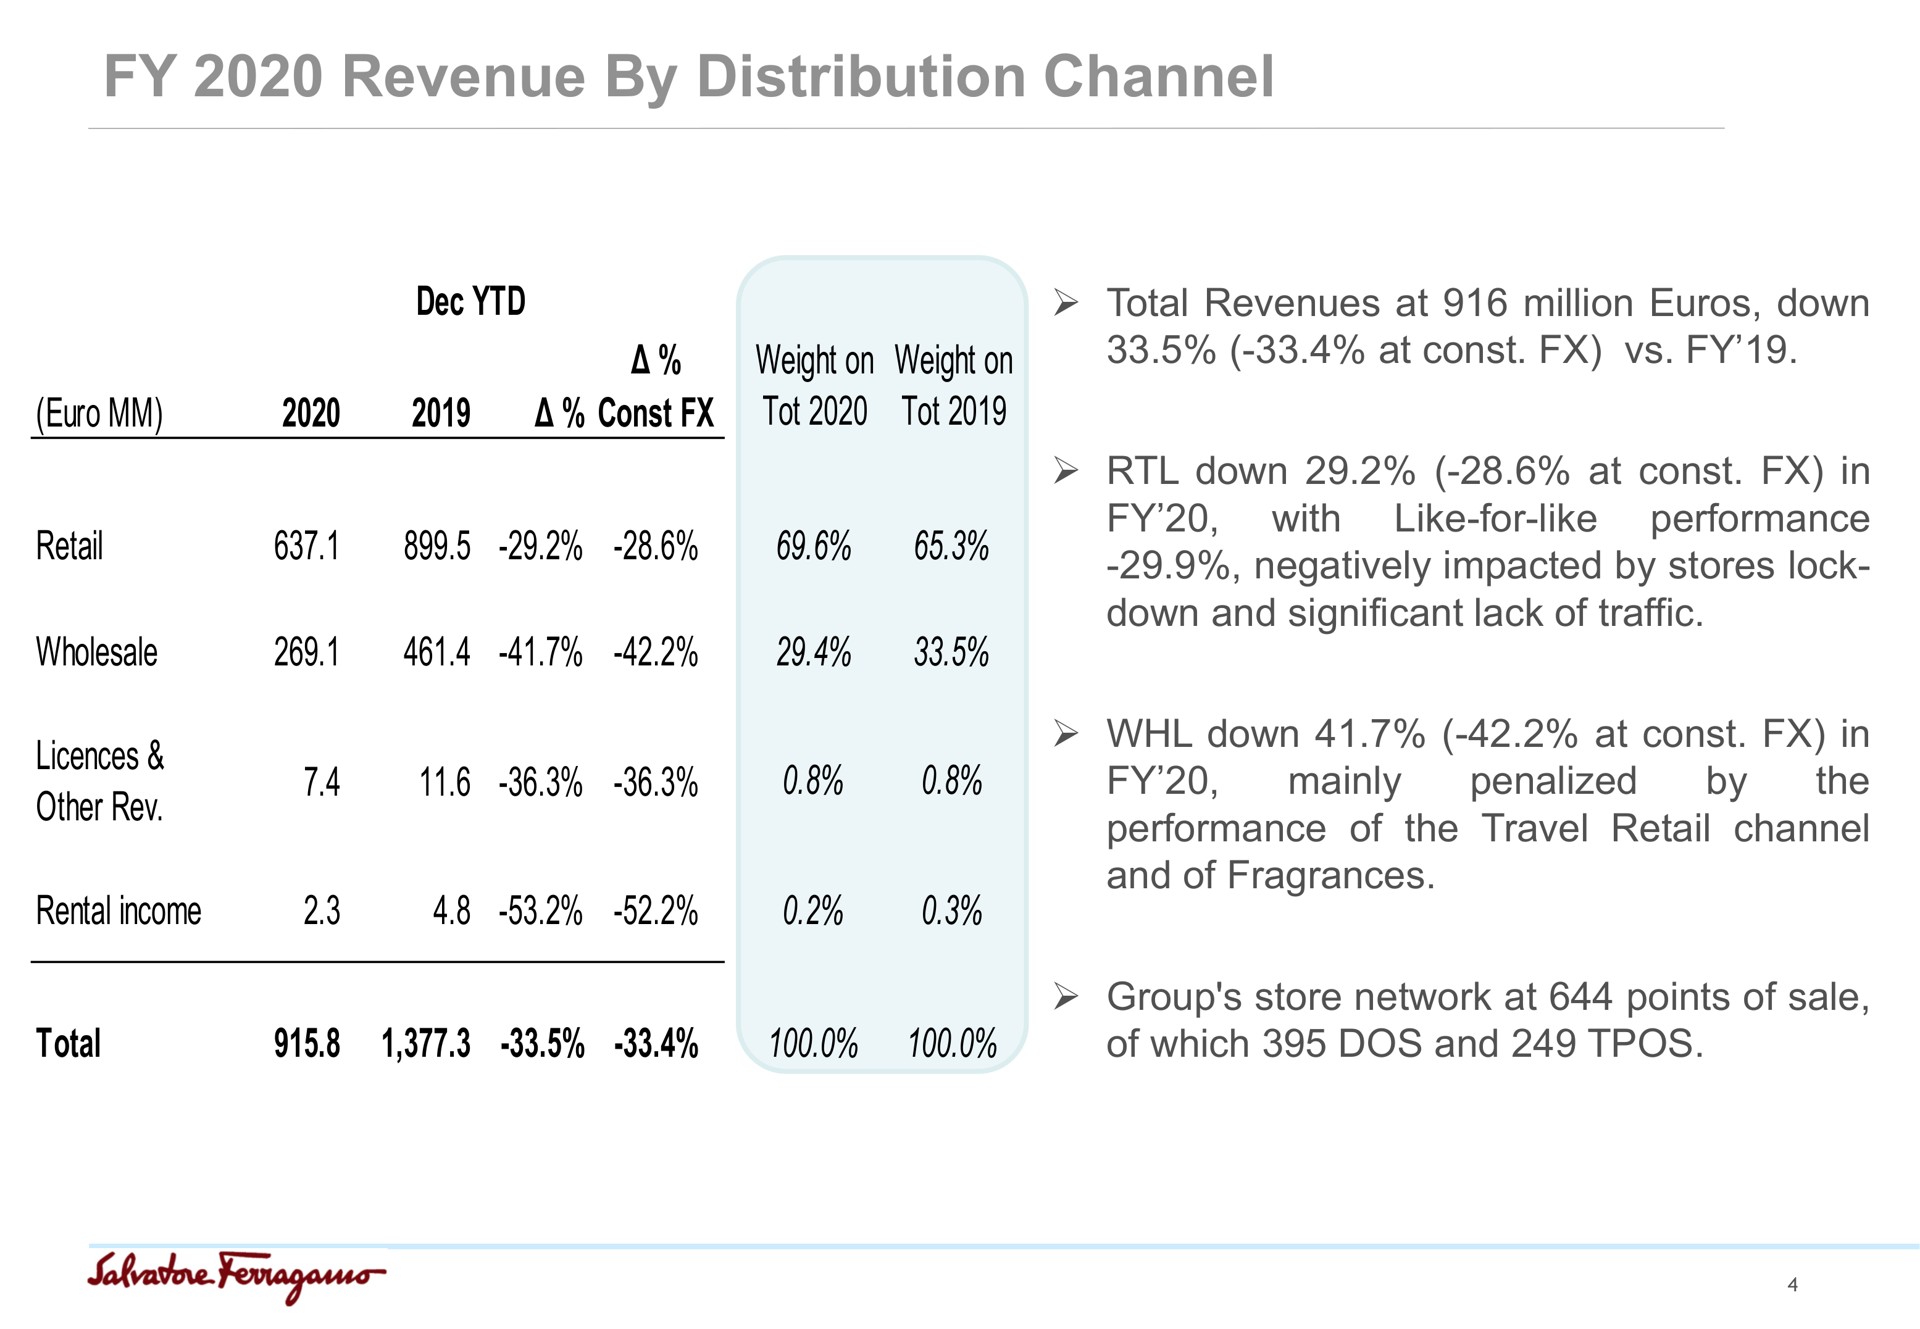 revenue by distribution channel weight on tot weight on tot retail wholesale other rev rental income total revenues at million down at down at in performance like for like with negatively impacted by stores lock down and significant lack of traffic down at in the the travel retail channel penalized mainly performance of and of fragrances by total of which dos and group store network at points of sale a a | Salvatore Ferragamo